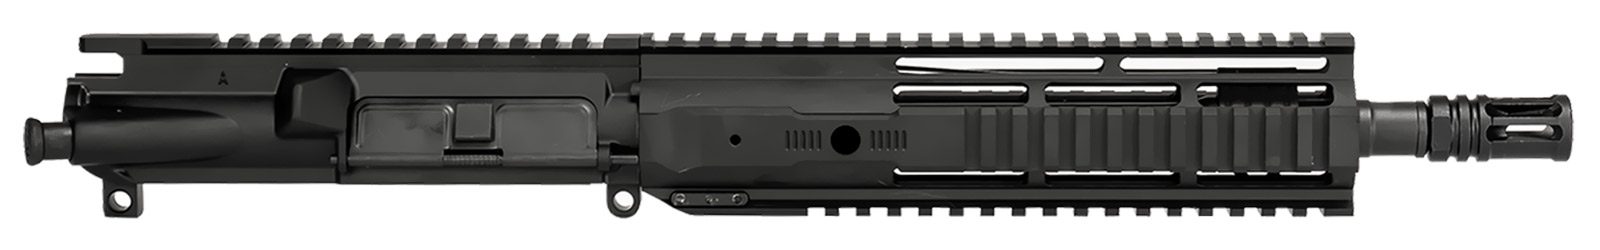 ar-15-upper-assembly-10-5-223-5-56-1-7-9-hera-arms-irs-unmarked-ar-15-handguard-rail